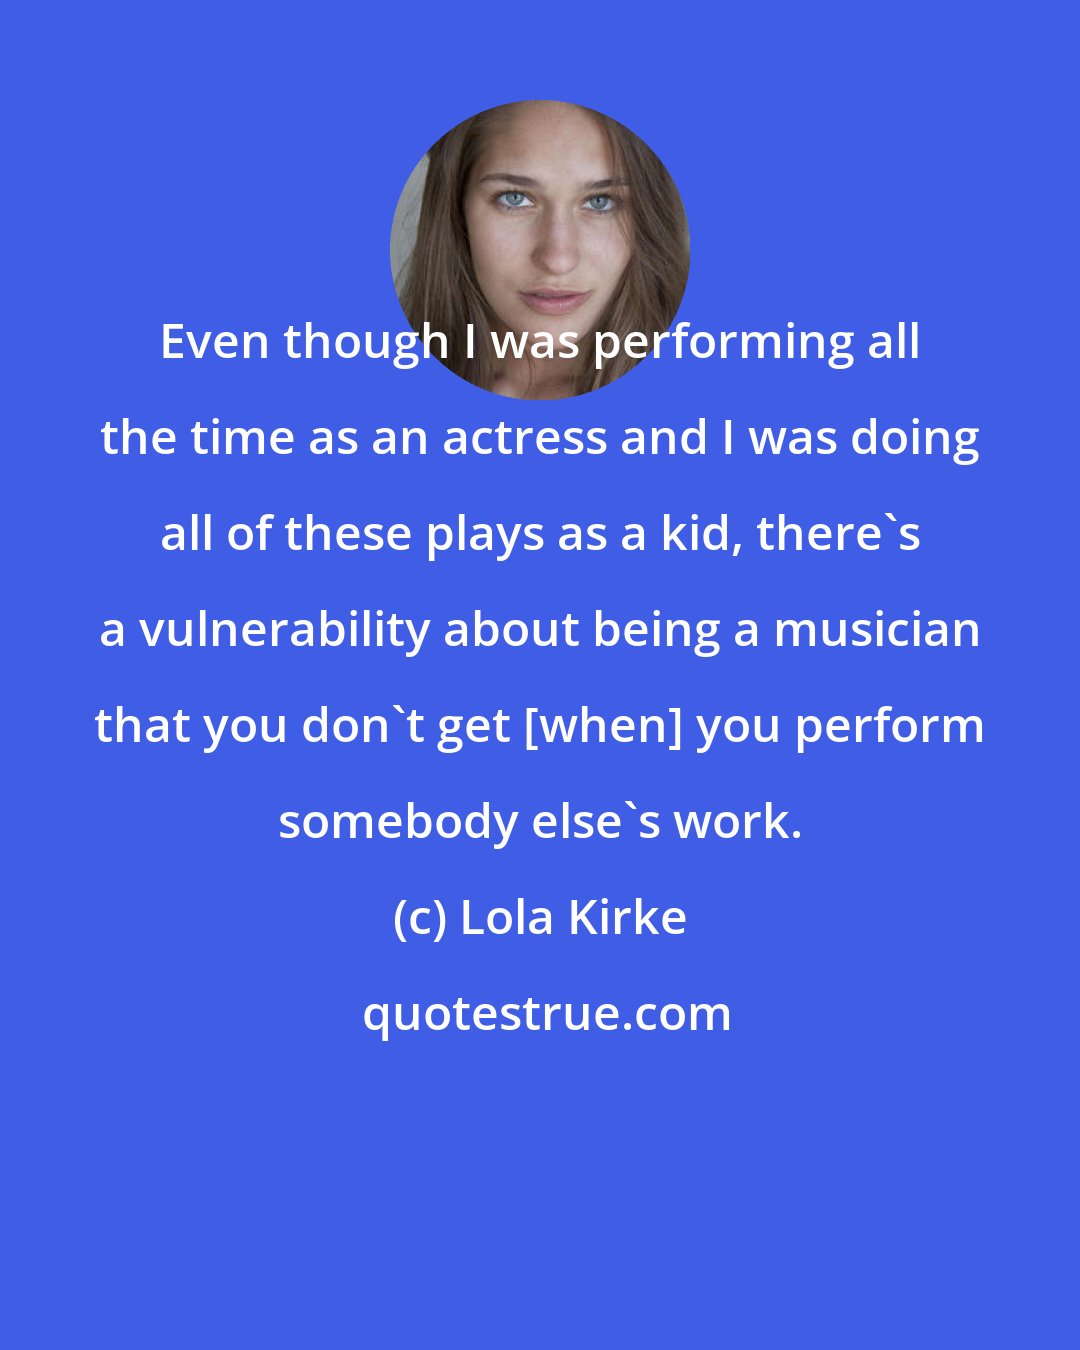 Lola Kirke: Even though I was performing all the time as an actress and I was doing all of these plays as a kid, there's a vulnerability about being a musician that you don't get [when] you perform somebody else's work.